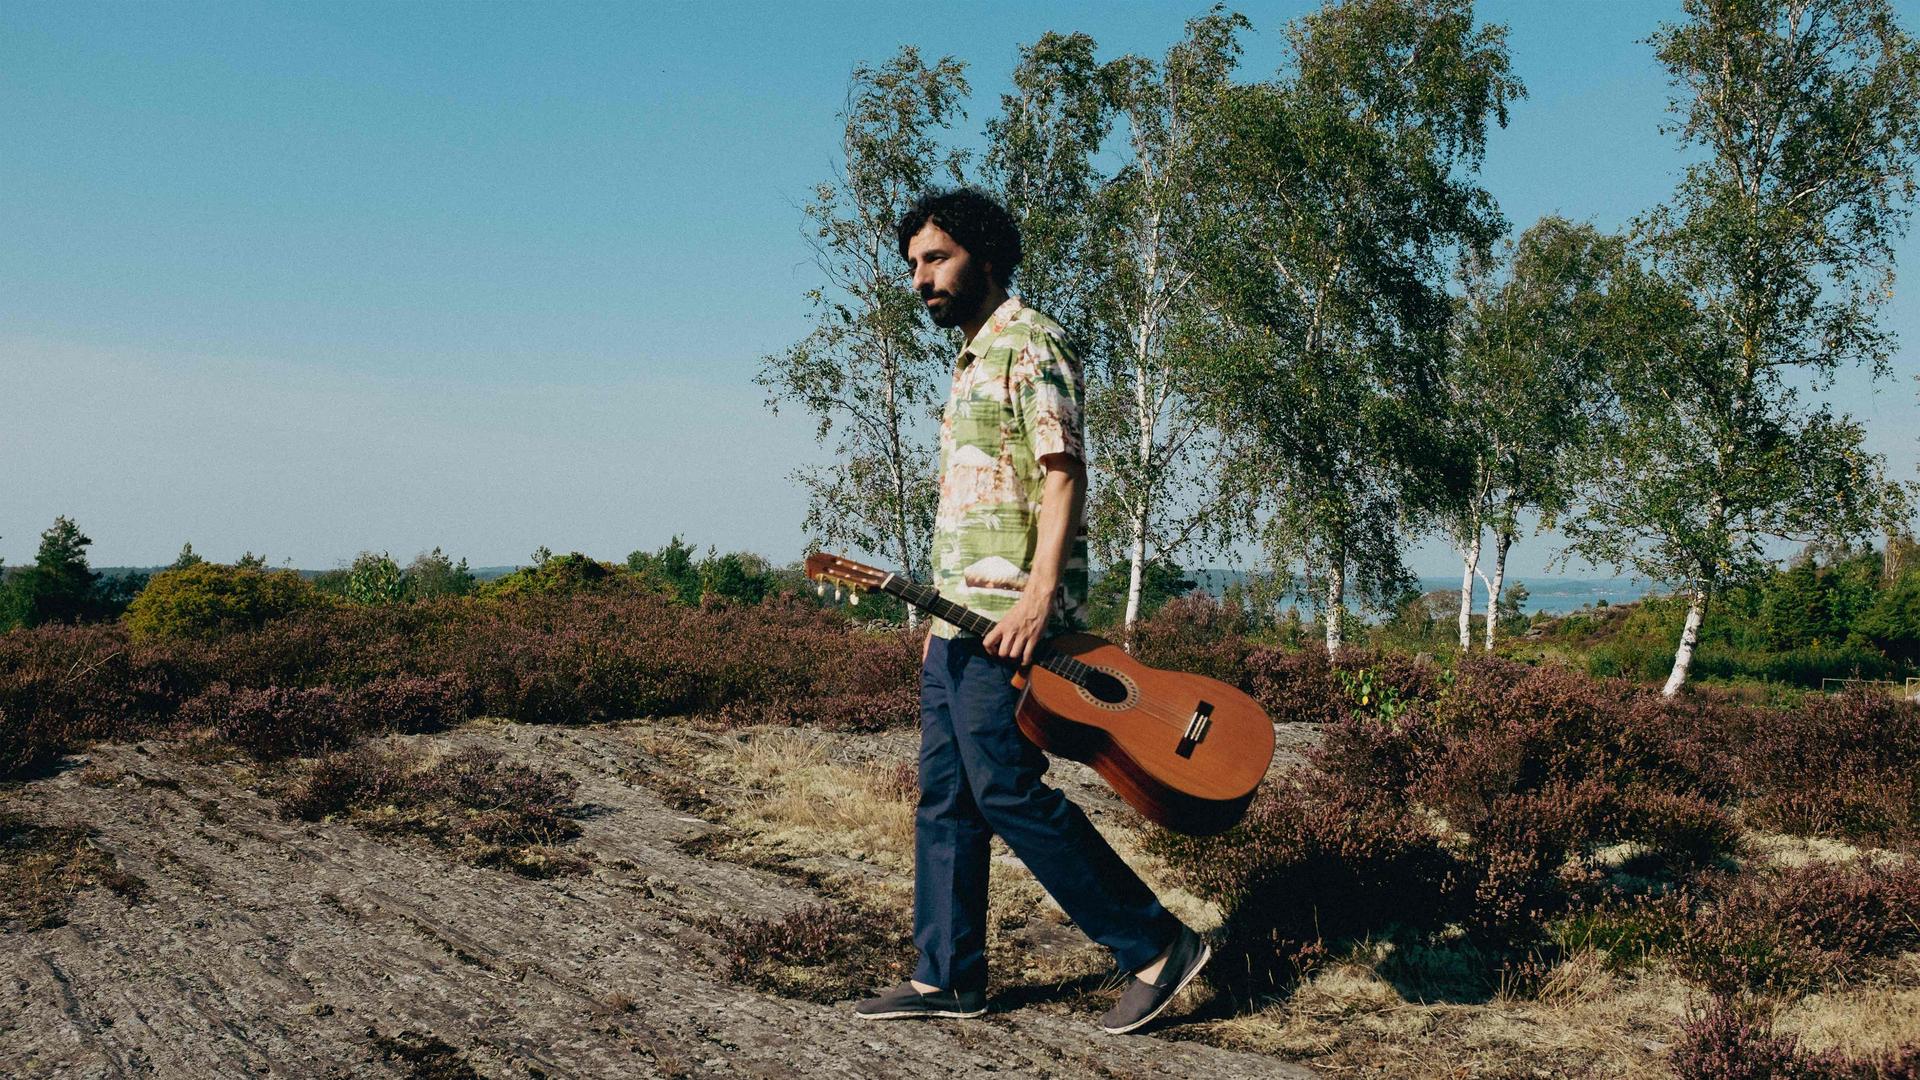 Swedish musician José González is known for stretching musical boundaries over his 18-year career. 